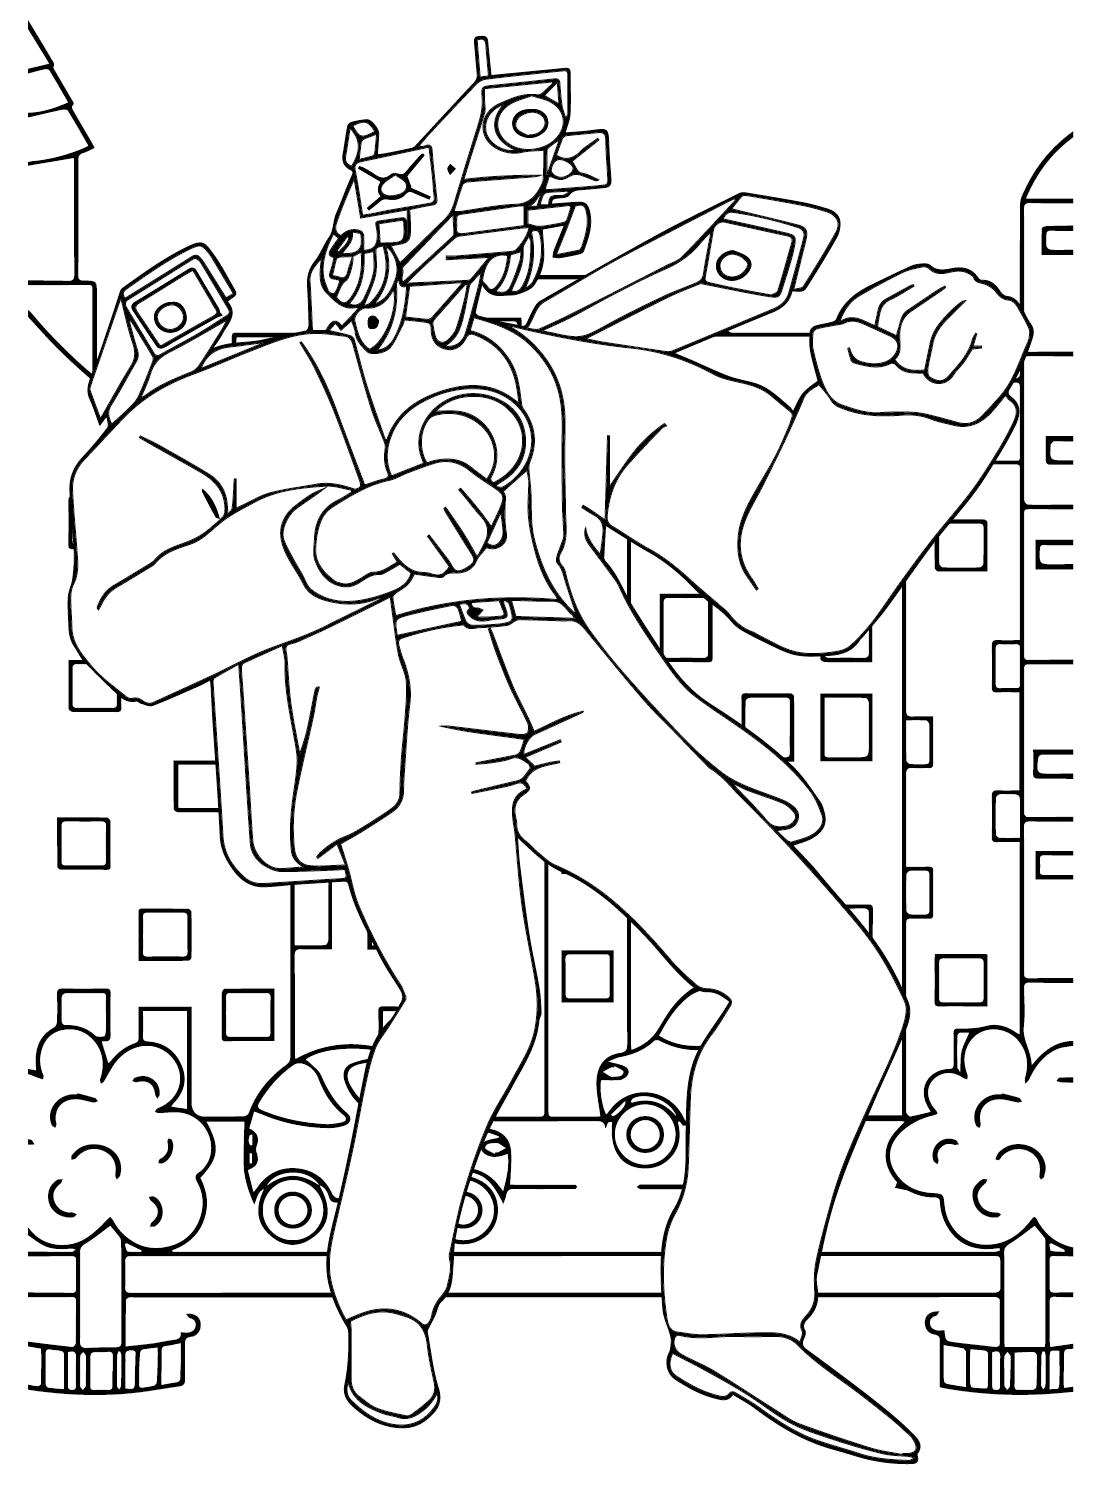 titan-cameraman-to-color-free-printable-coloring-pages